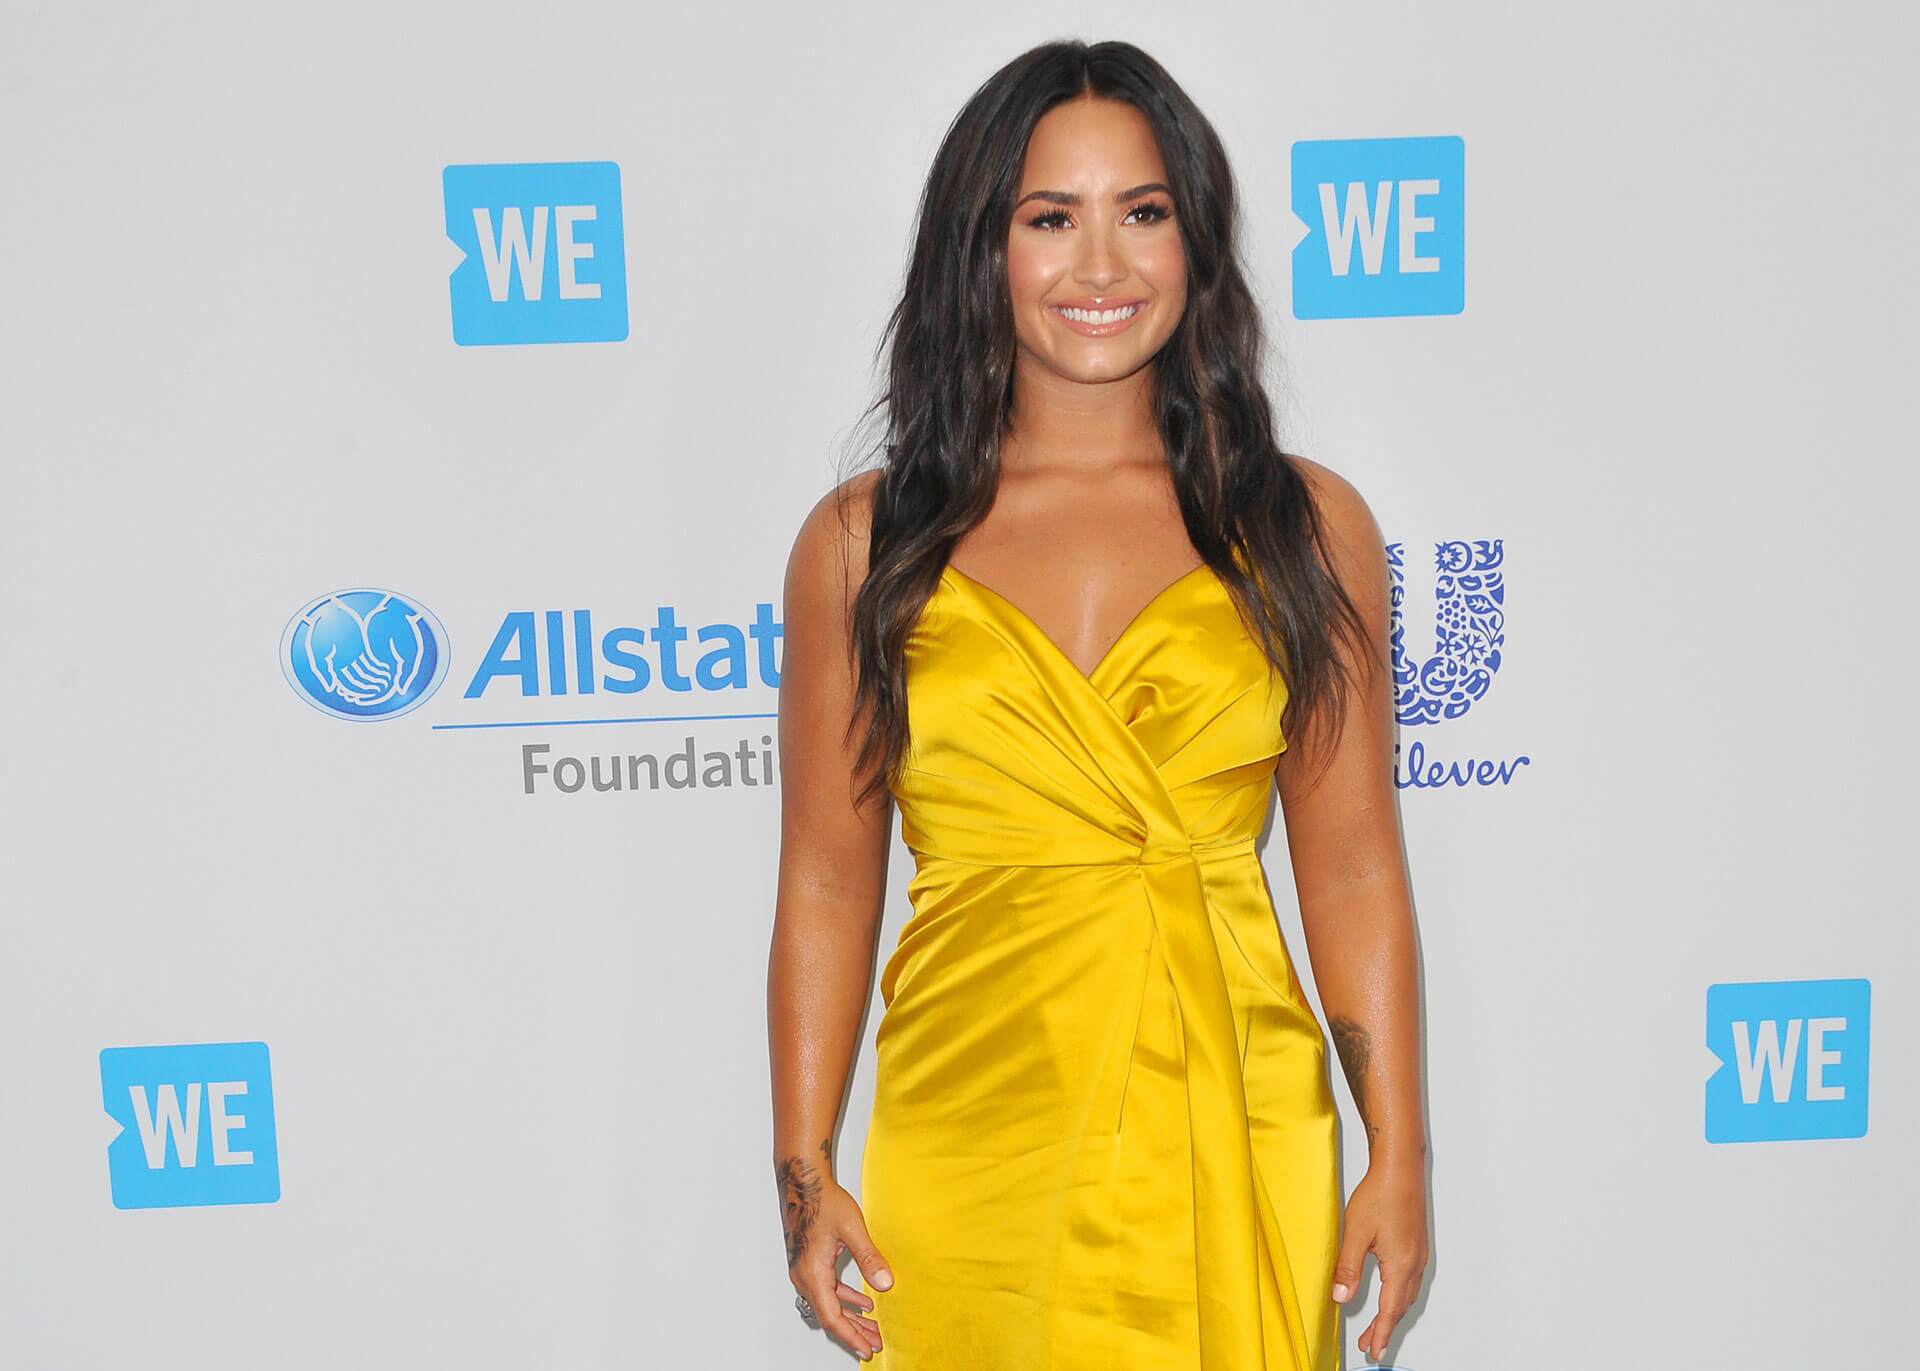 Demi Lovato's Ongoing Struggle: "Addiction Does Not Just Disappear"